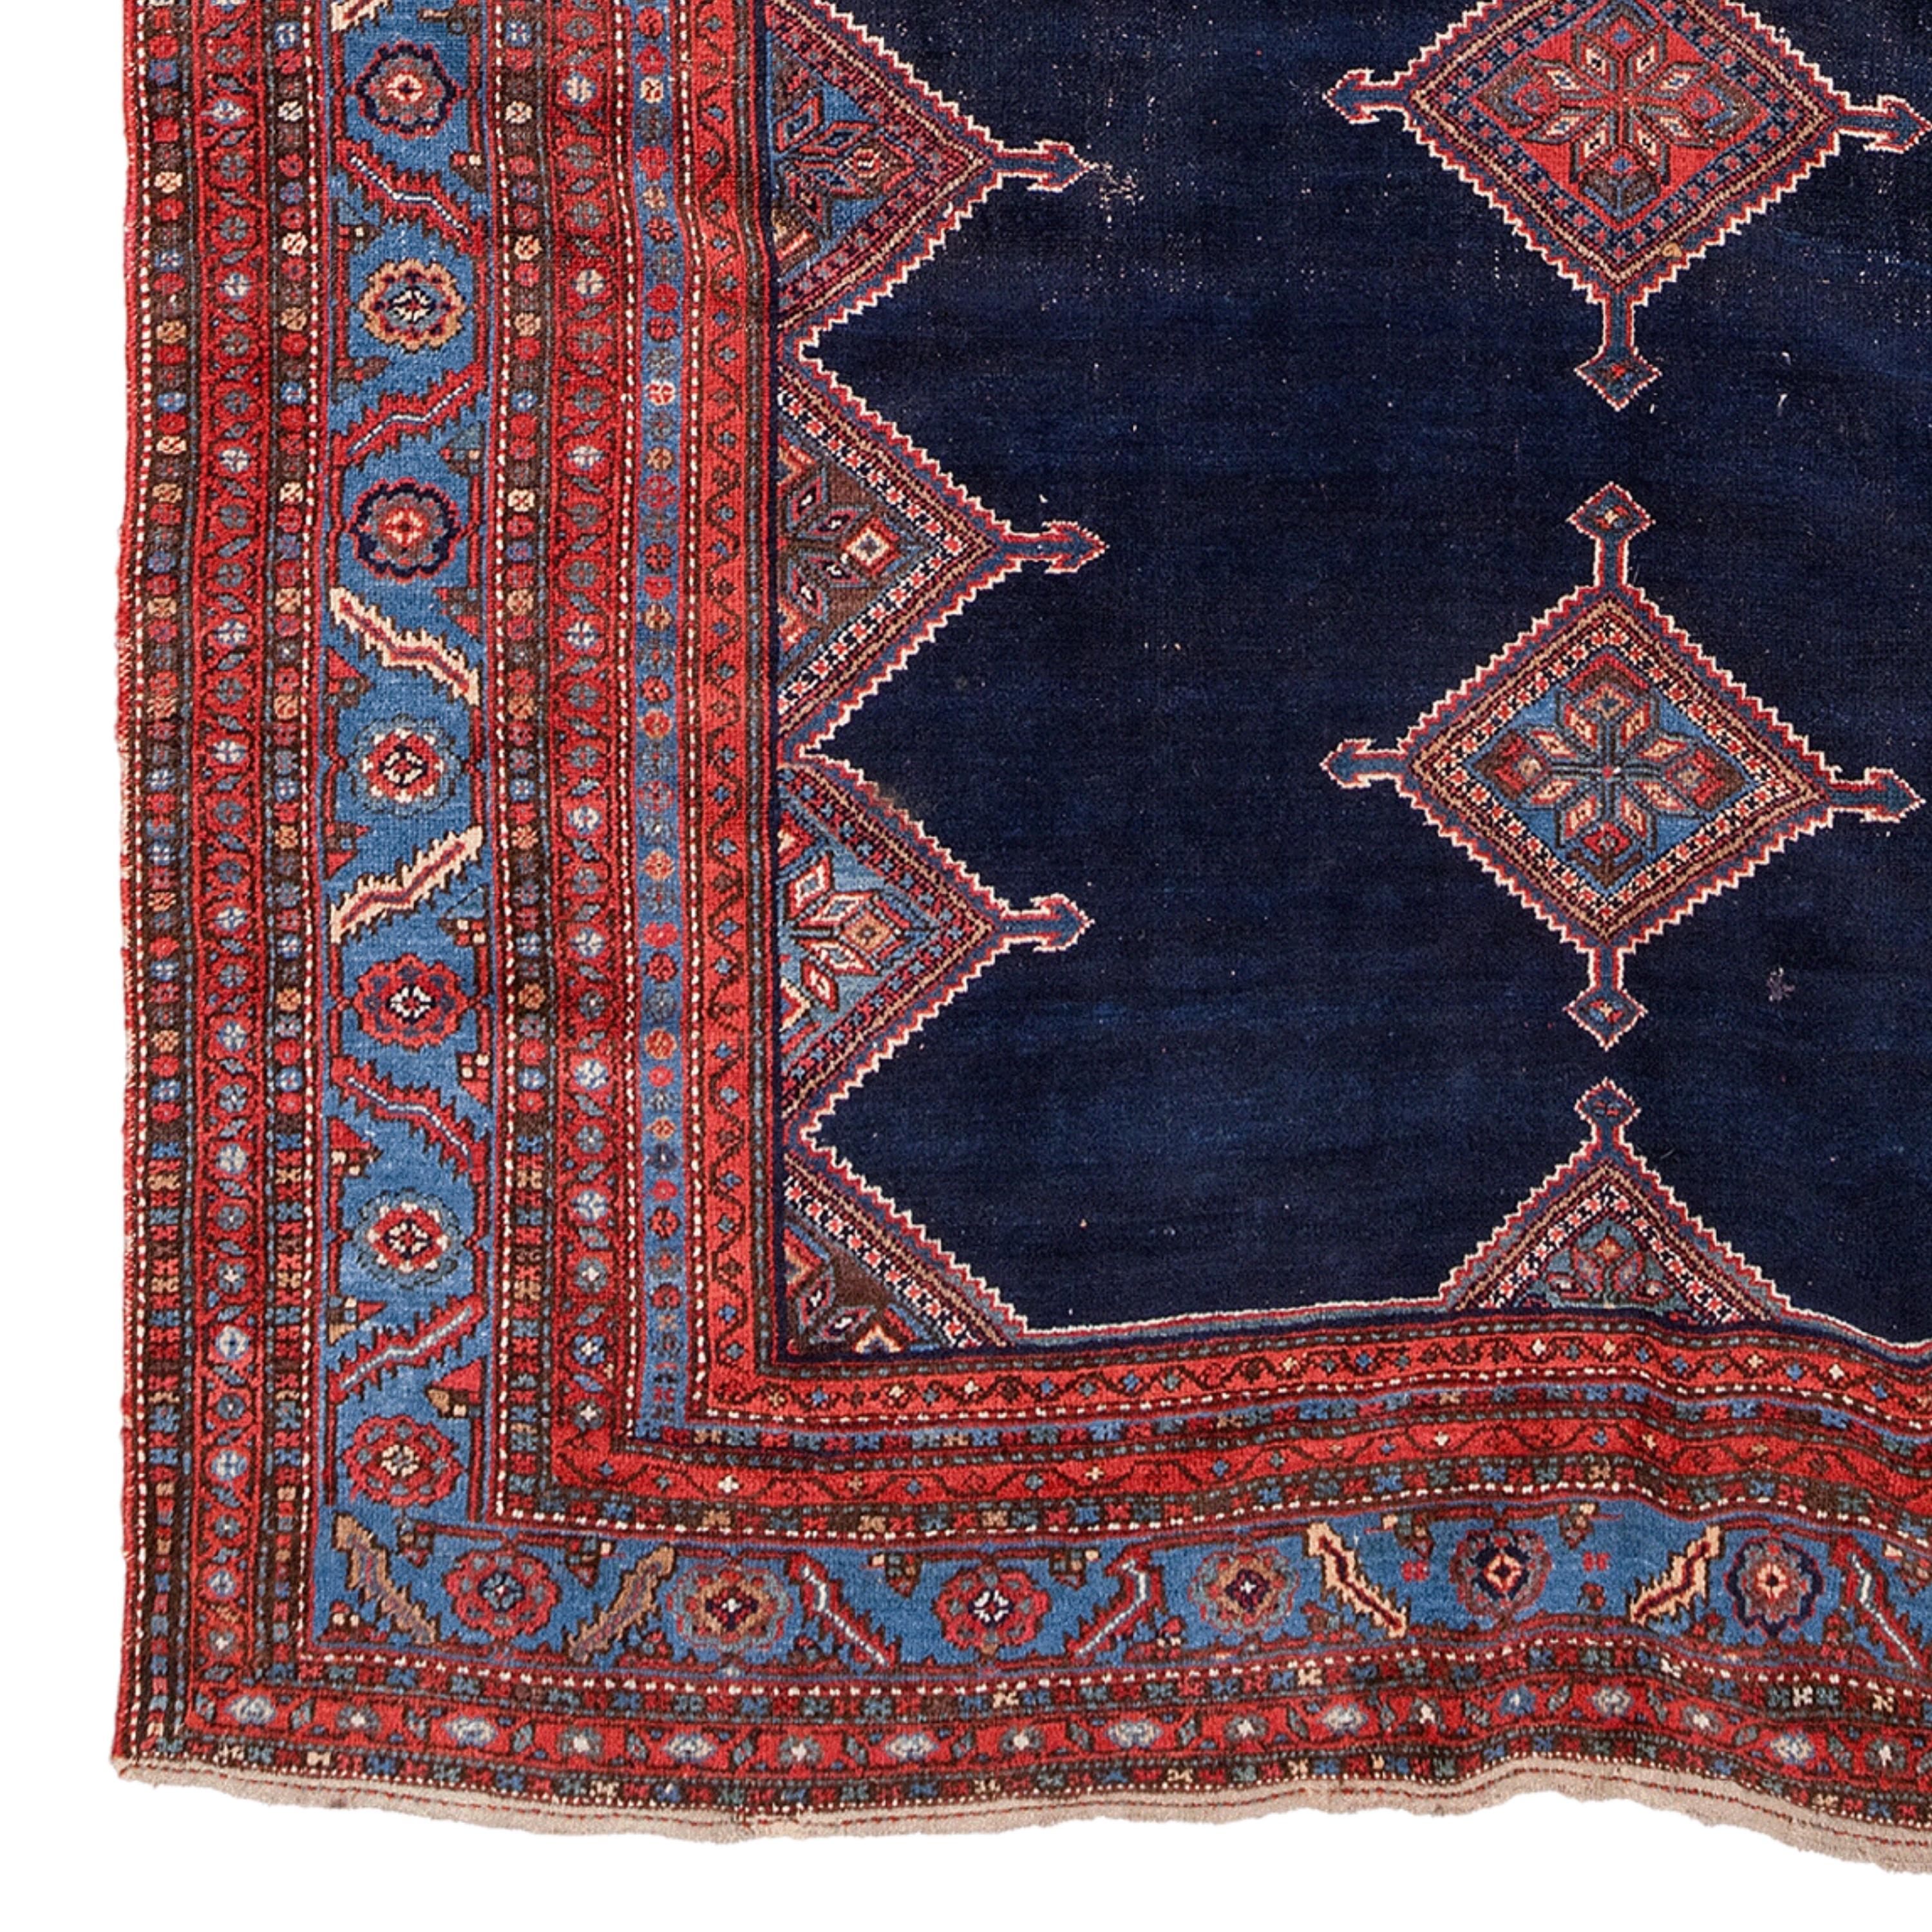 19th Century Malayer Rug, Vintage Rug

This extraordinary carpet will fascinate you with its intricate designs and vibrant colors that reflect the rich history and craftsmanship of the period. Each stitch tells the story of skilled craftsmen who